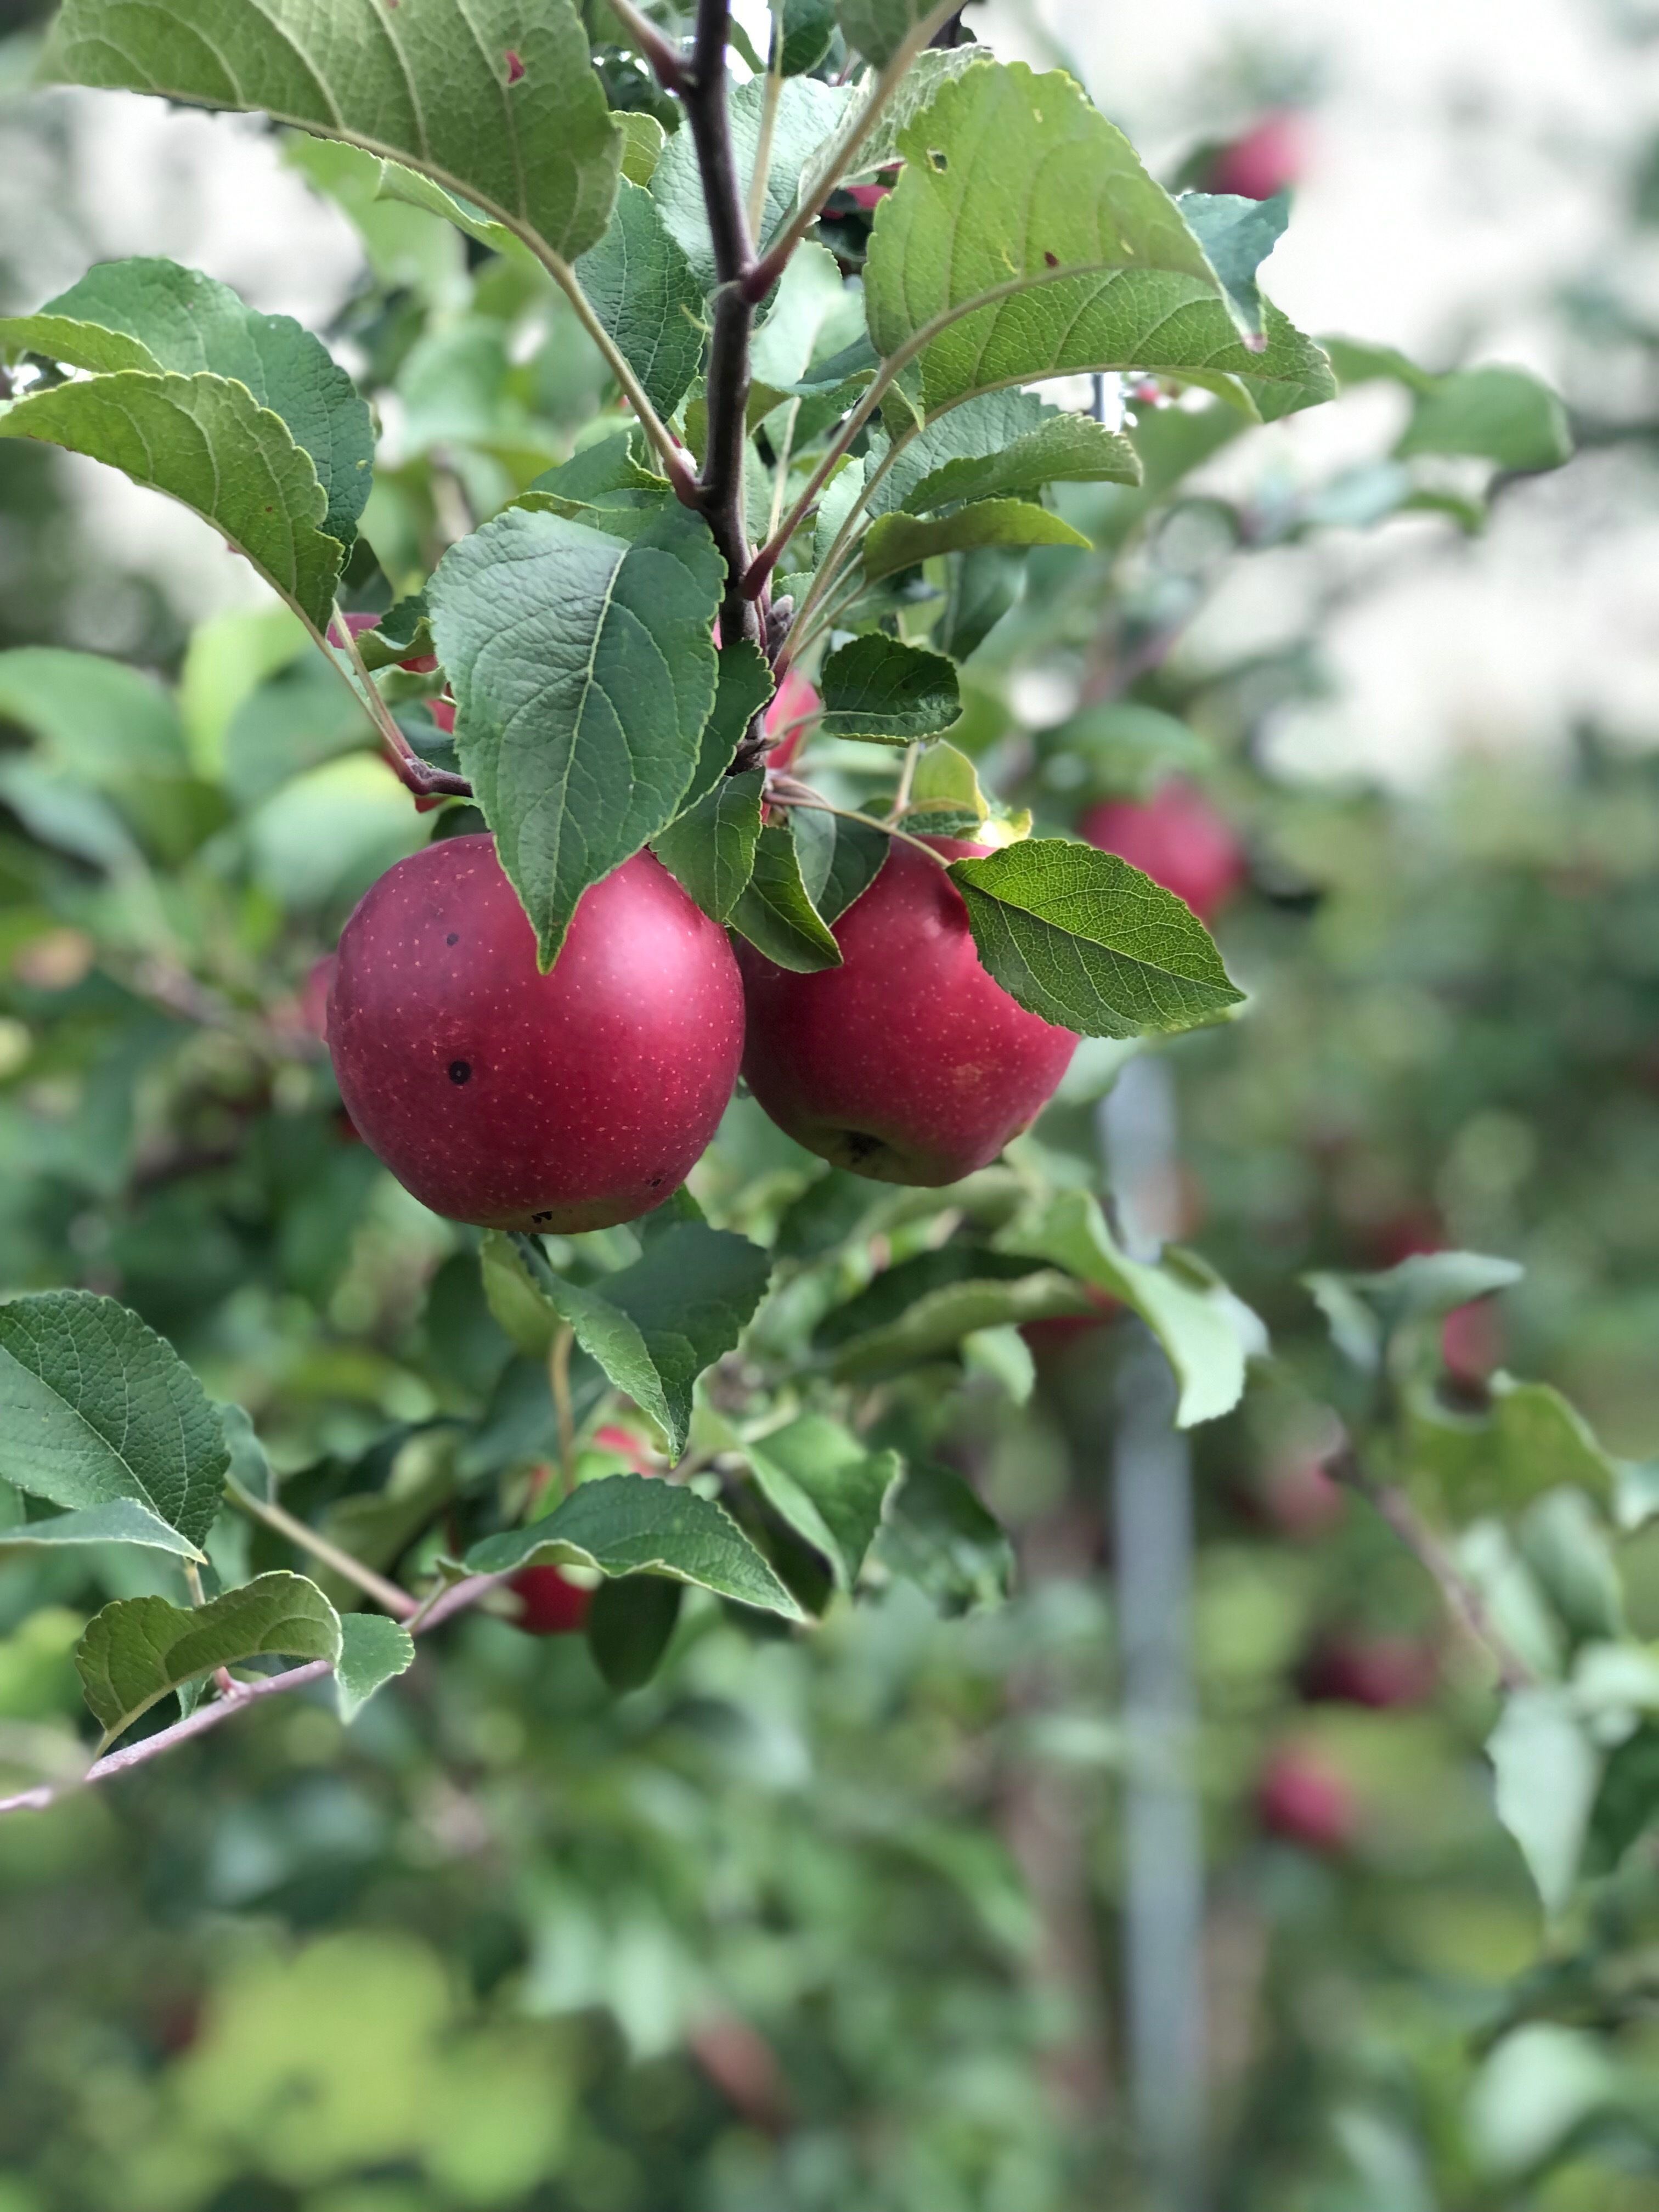 Cider Week(s): Relishing Fall with the Humble Apple